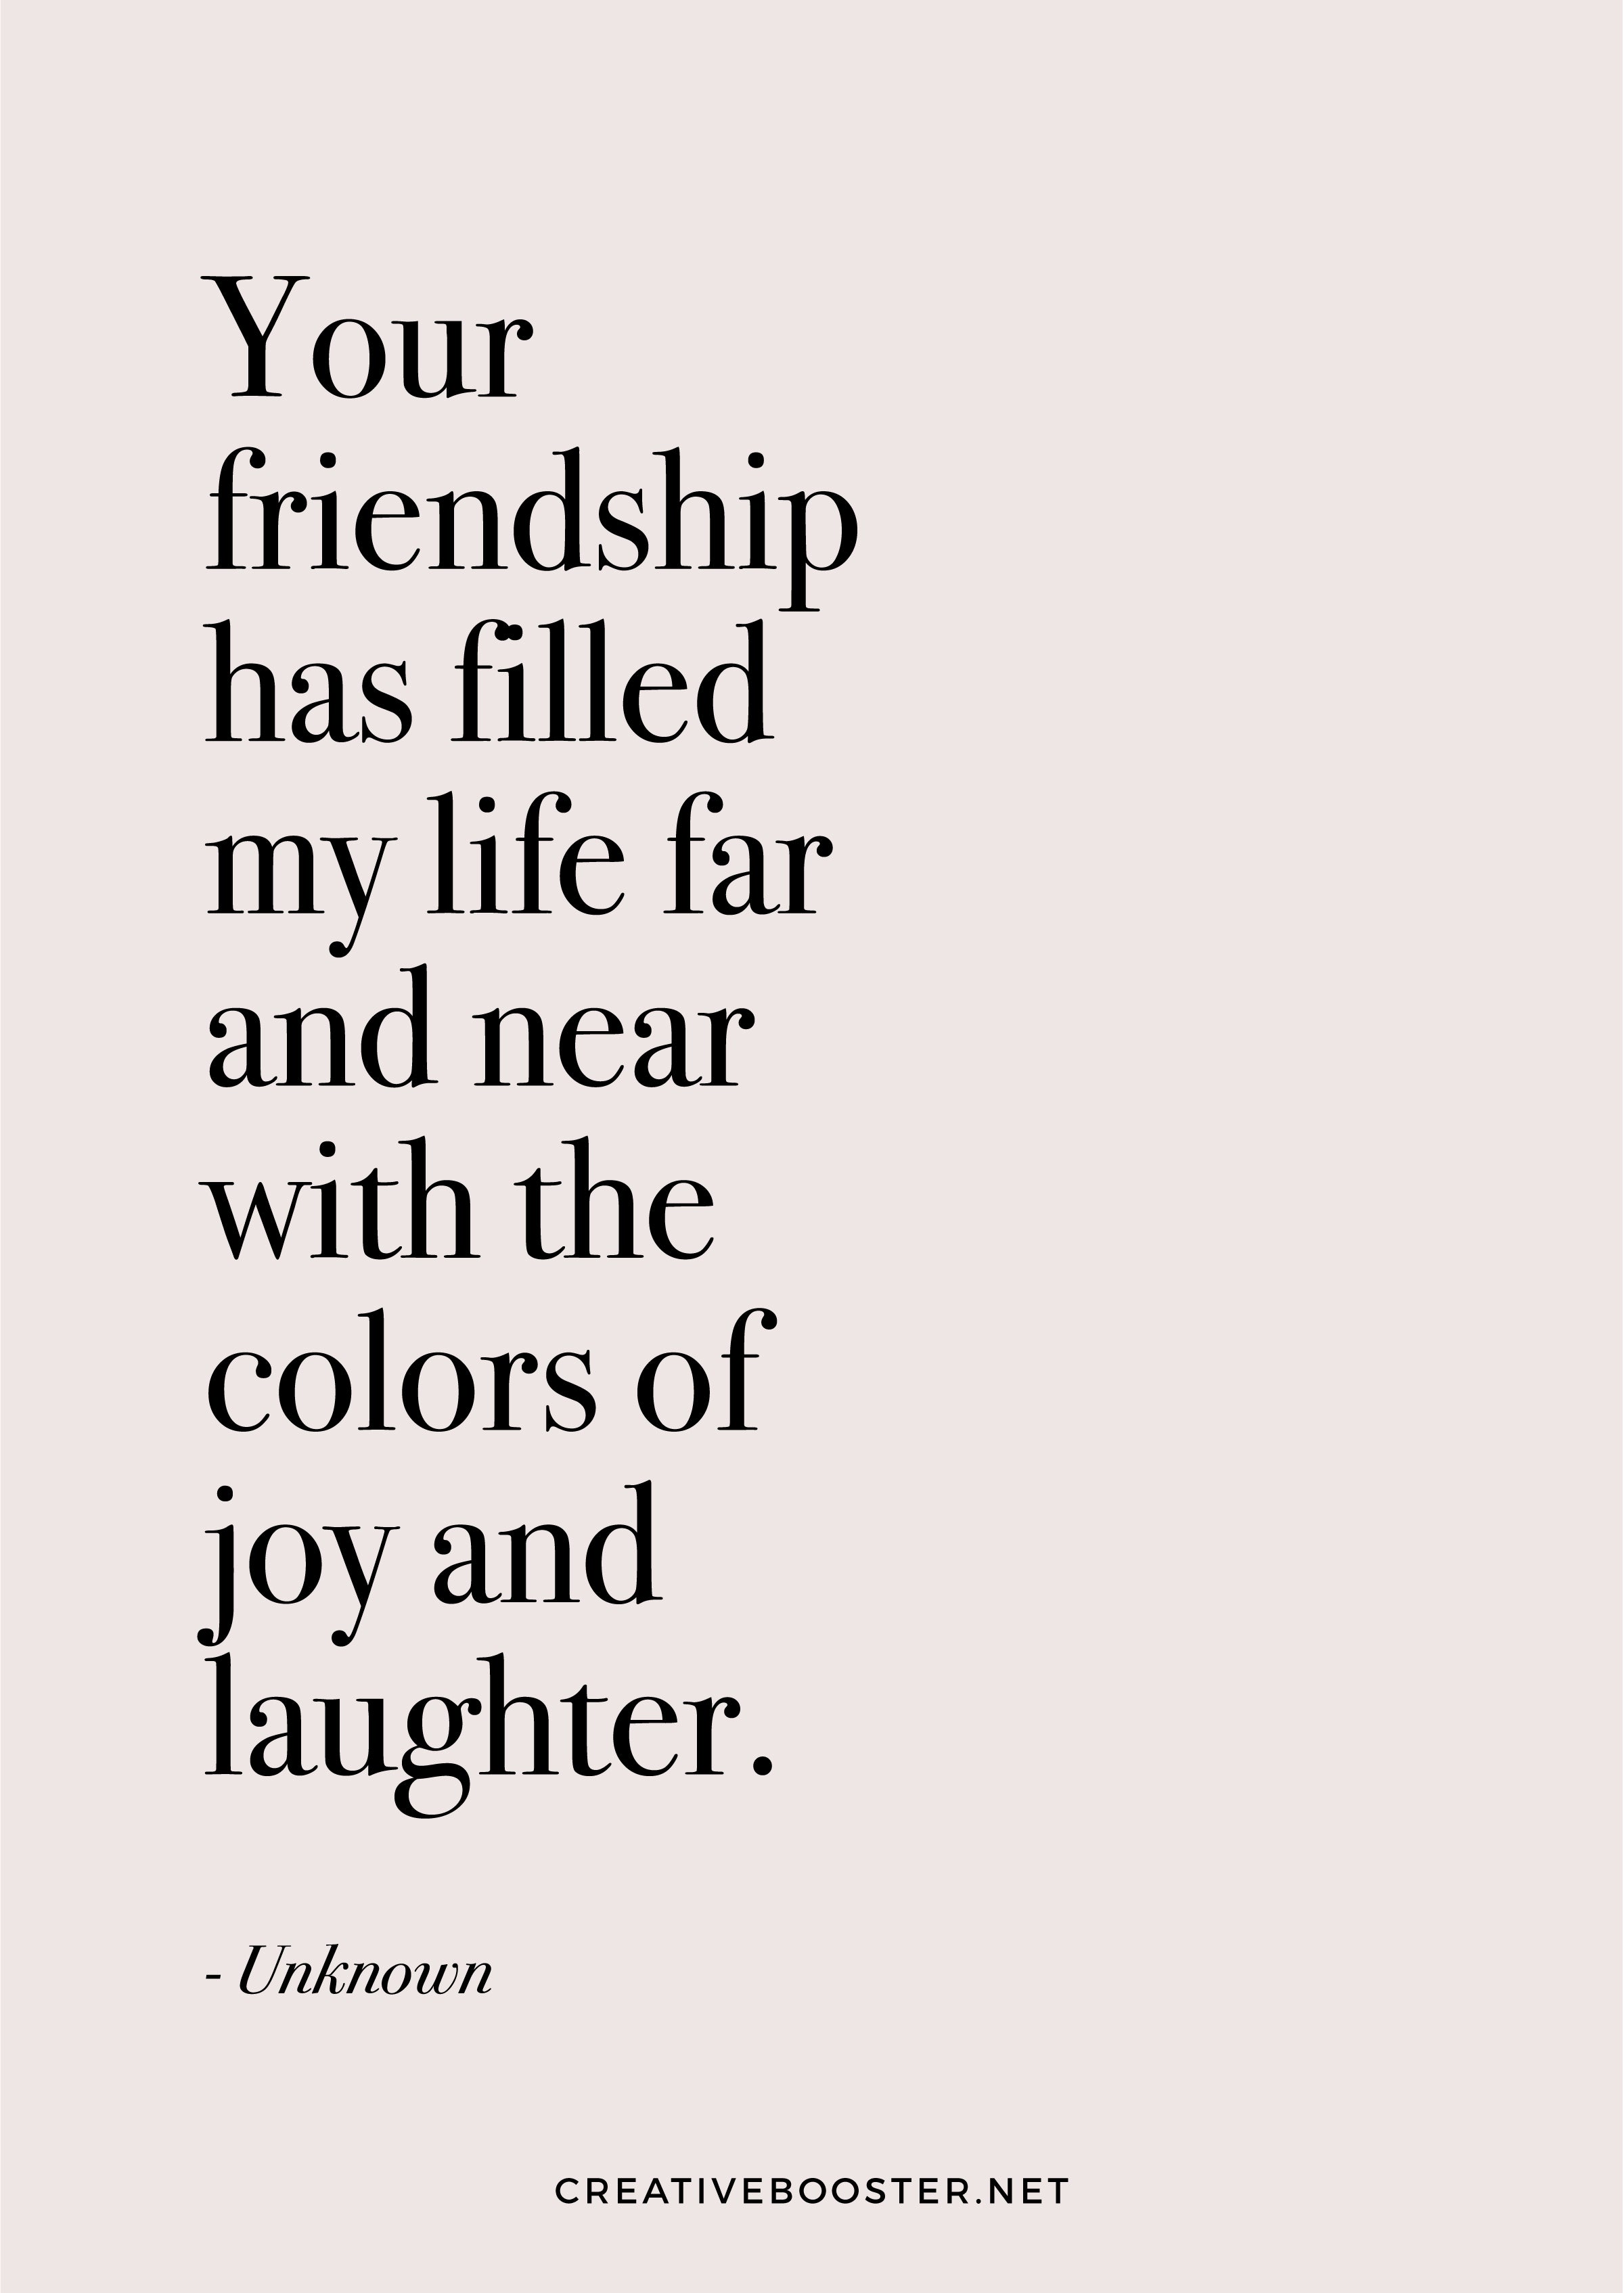 "Your friendship has filled my life far and near with the colors of joy and laughter." — Unknown